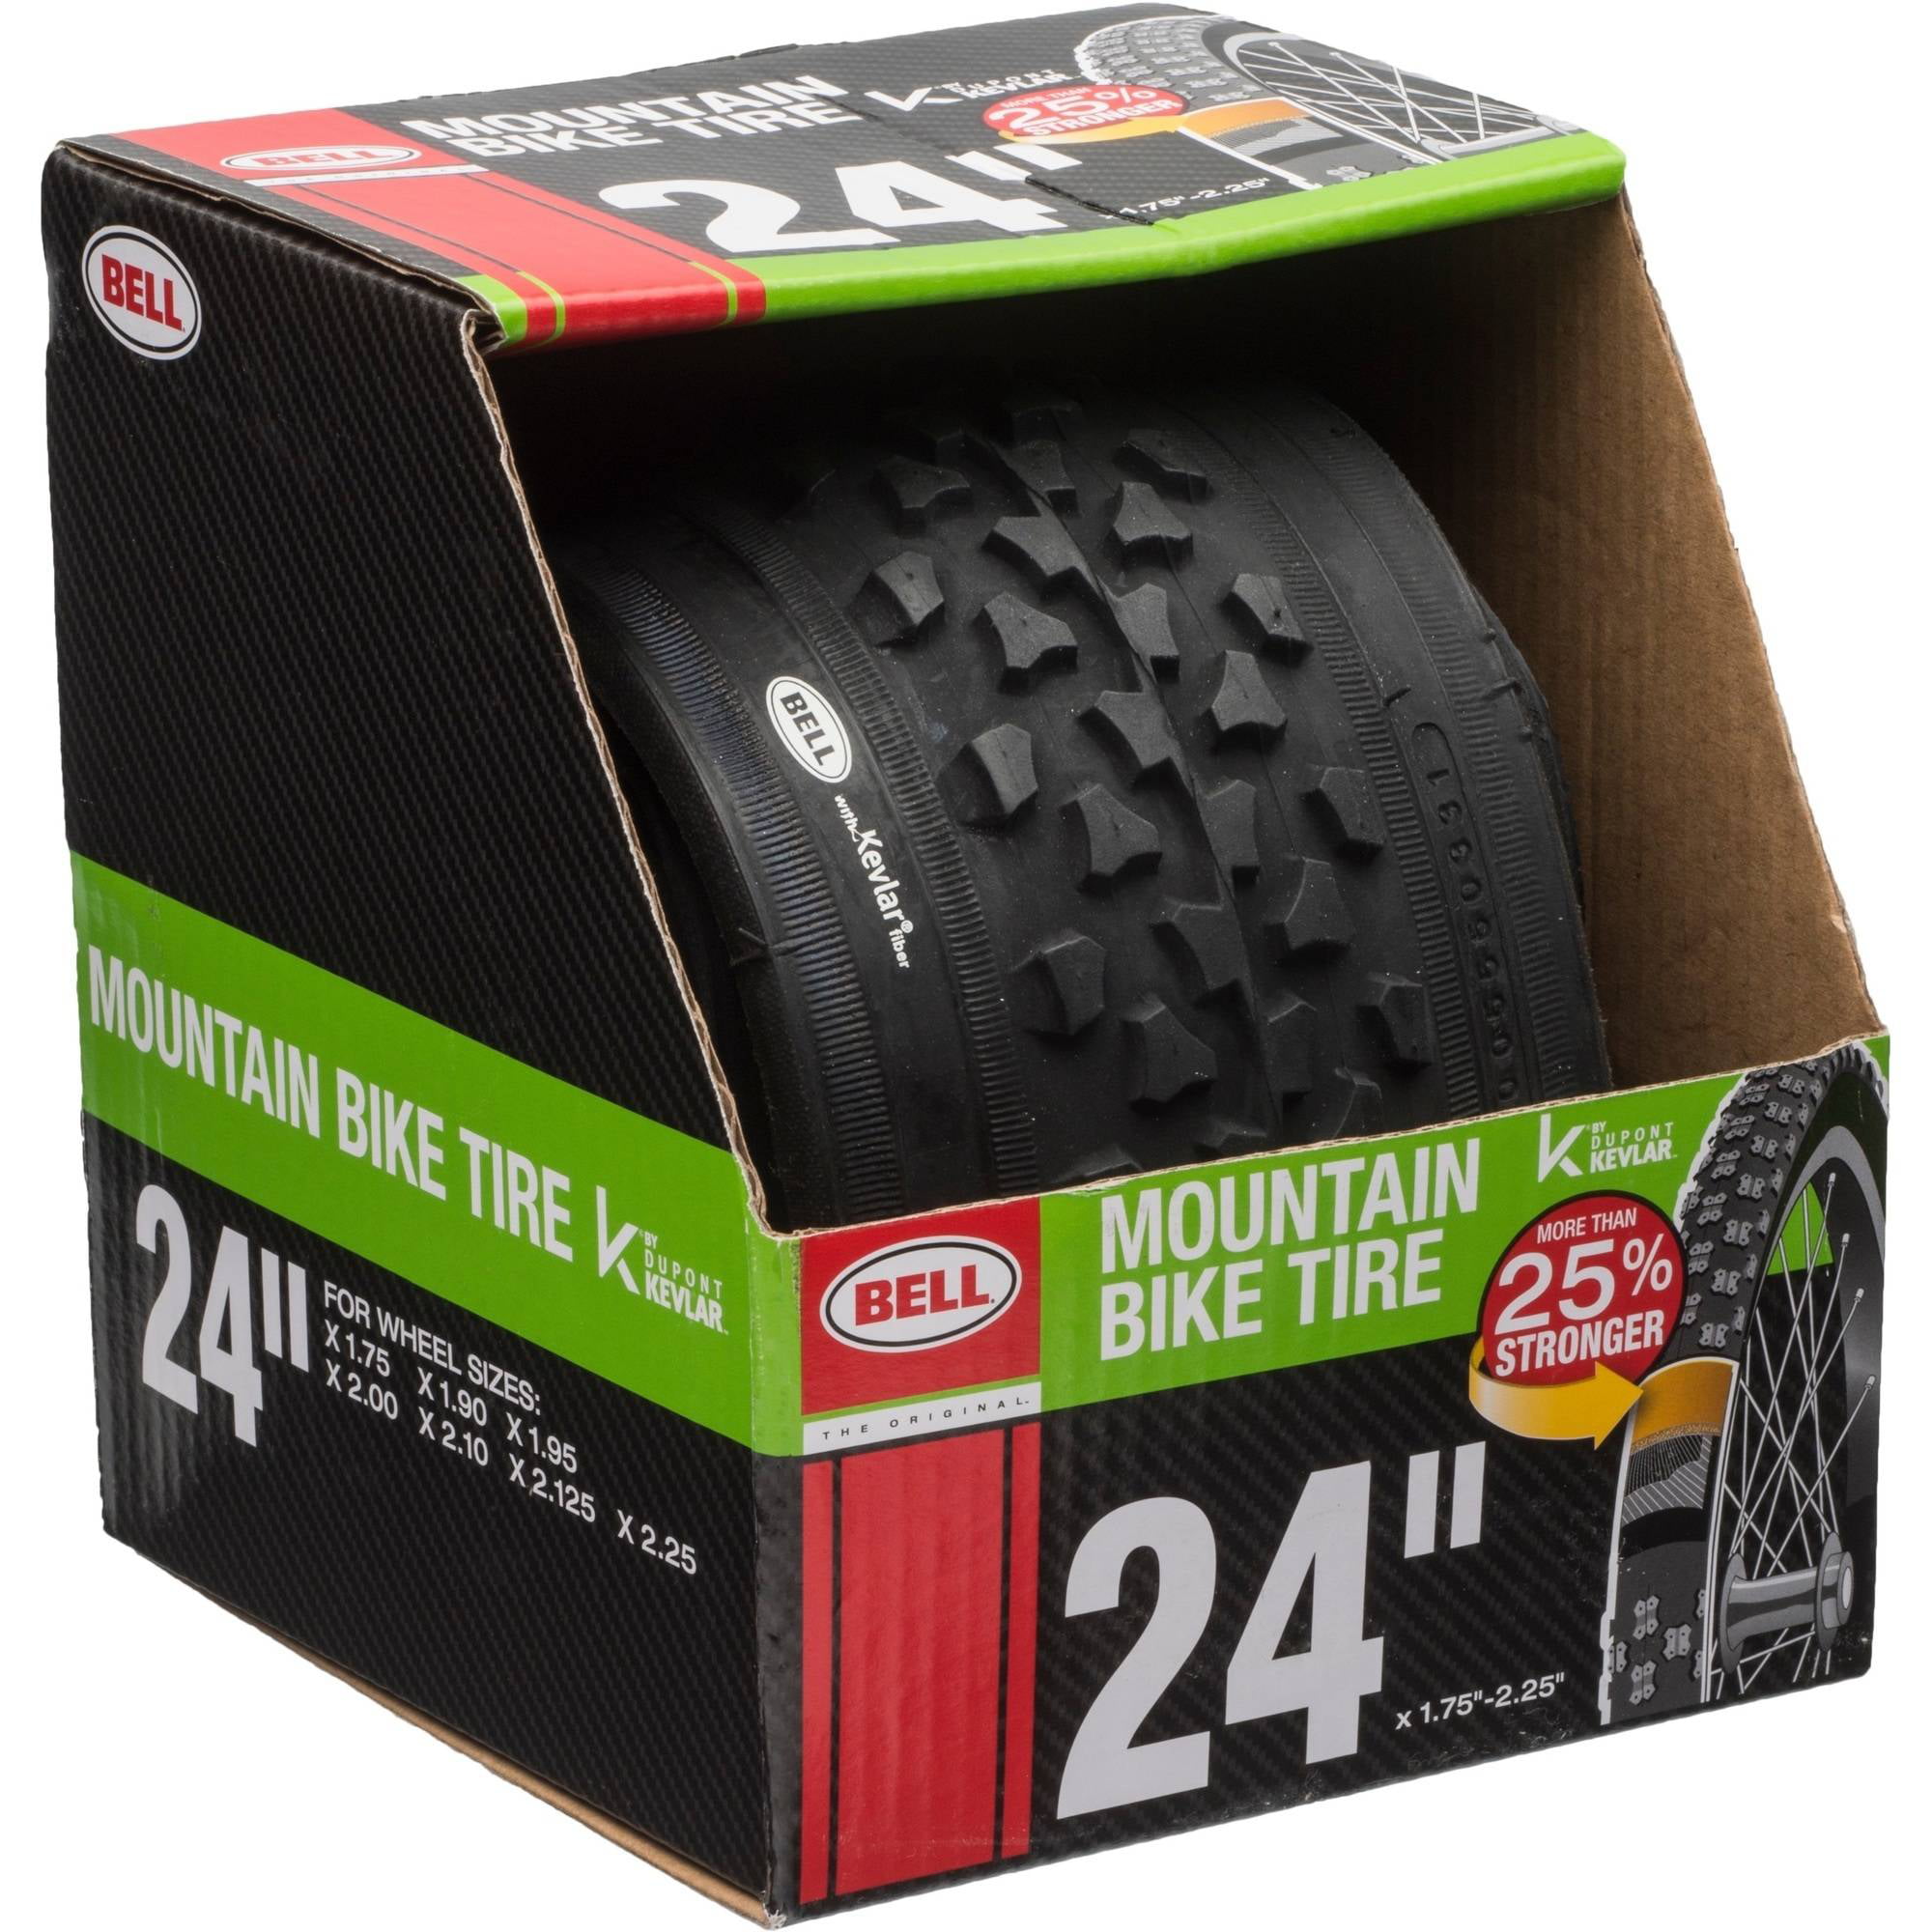 Bell 7014785 Traction 26" Mountain Bike Tire for sale online 